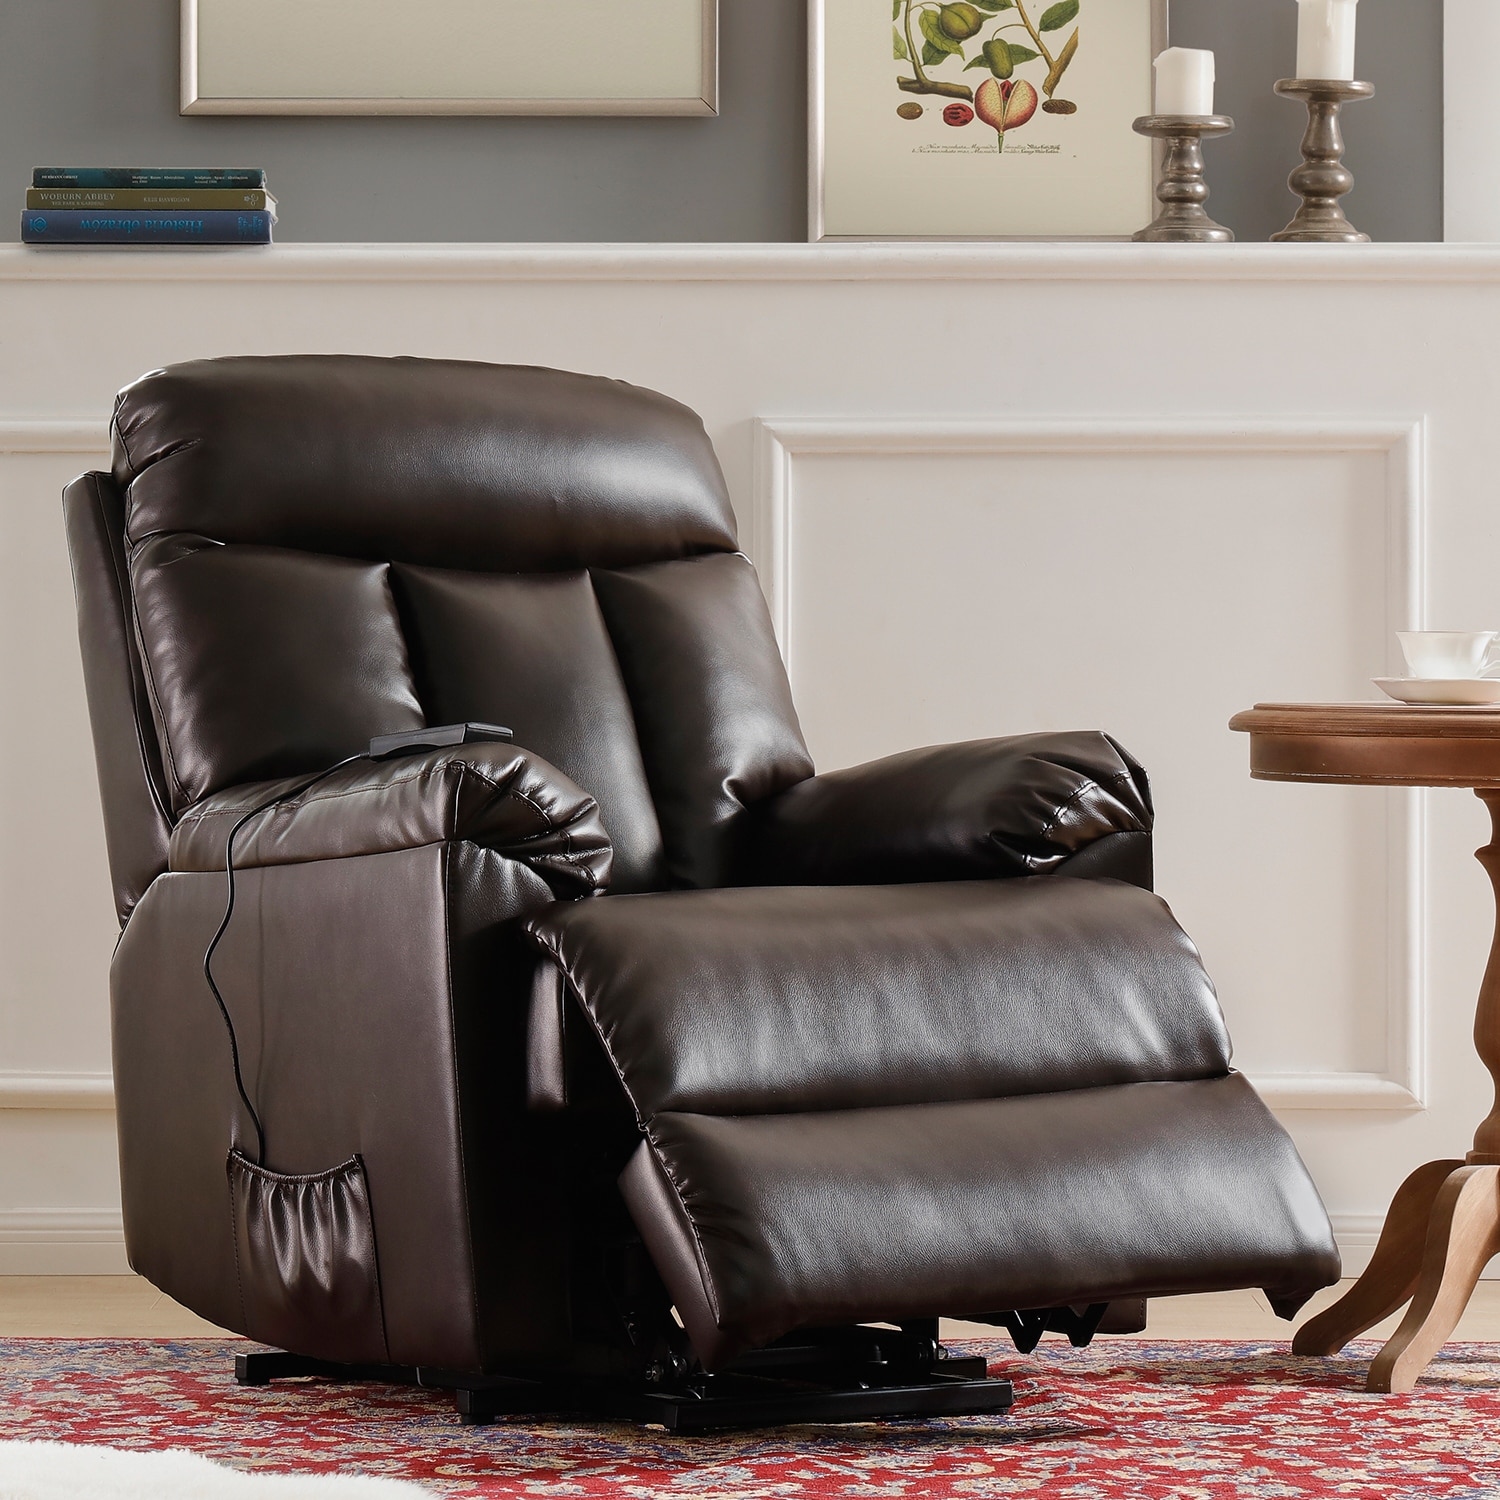 Lift Chair And Power PU Leather Living Room Heavy Duty Reclining Mechanism On Sale Overstock 31414805